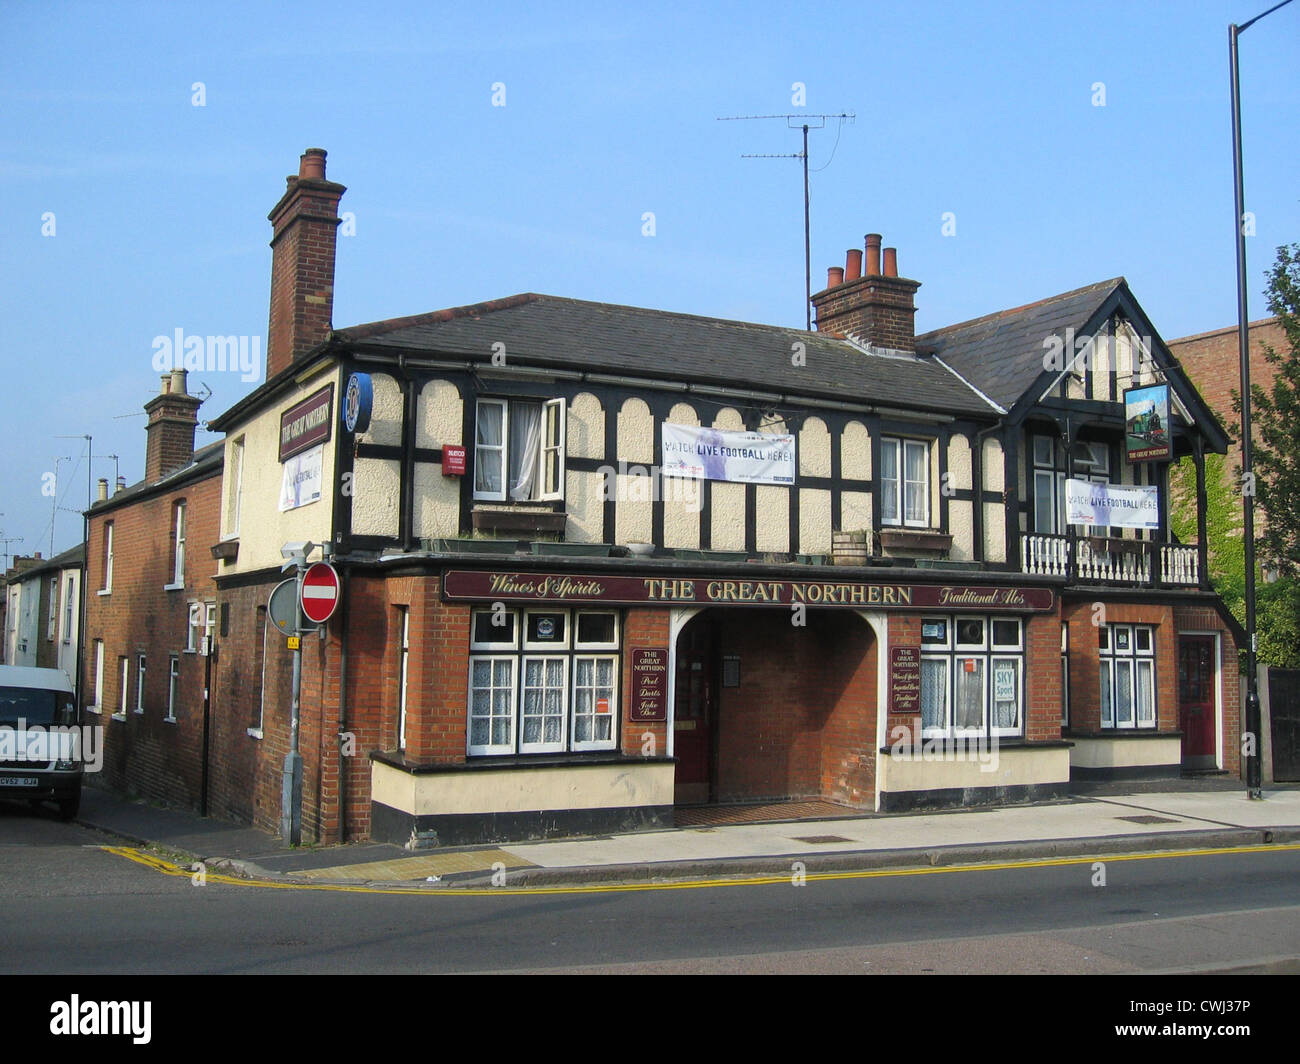 The Great Northern, London Road, St Albans, Hertfordshire, England, UK Stock Photo